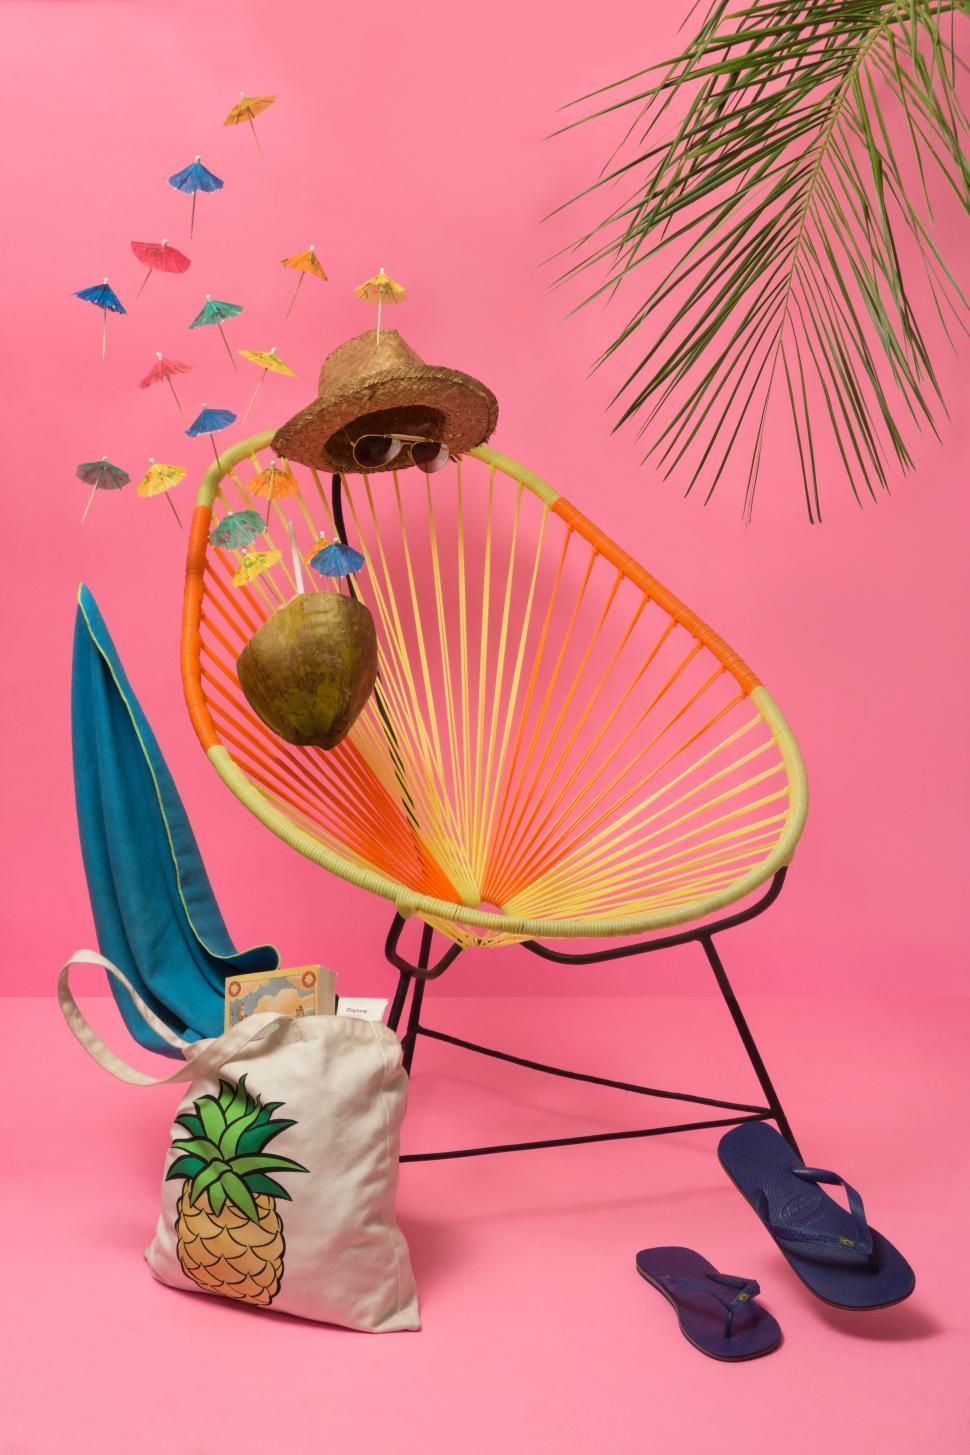 Free Image of Pink Background With Chair, Umbrella, Flip Flops, and Pineapple 